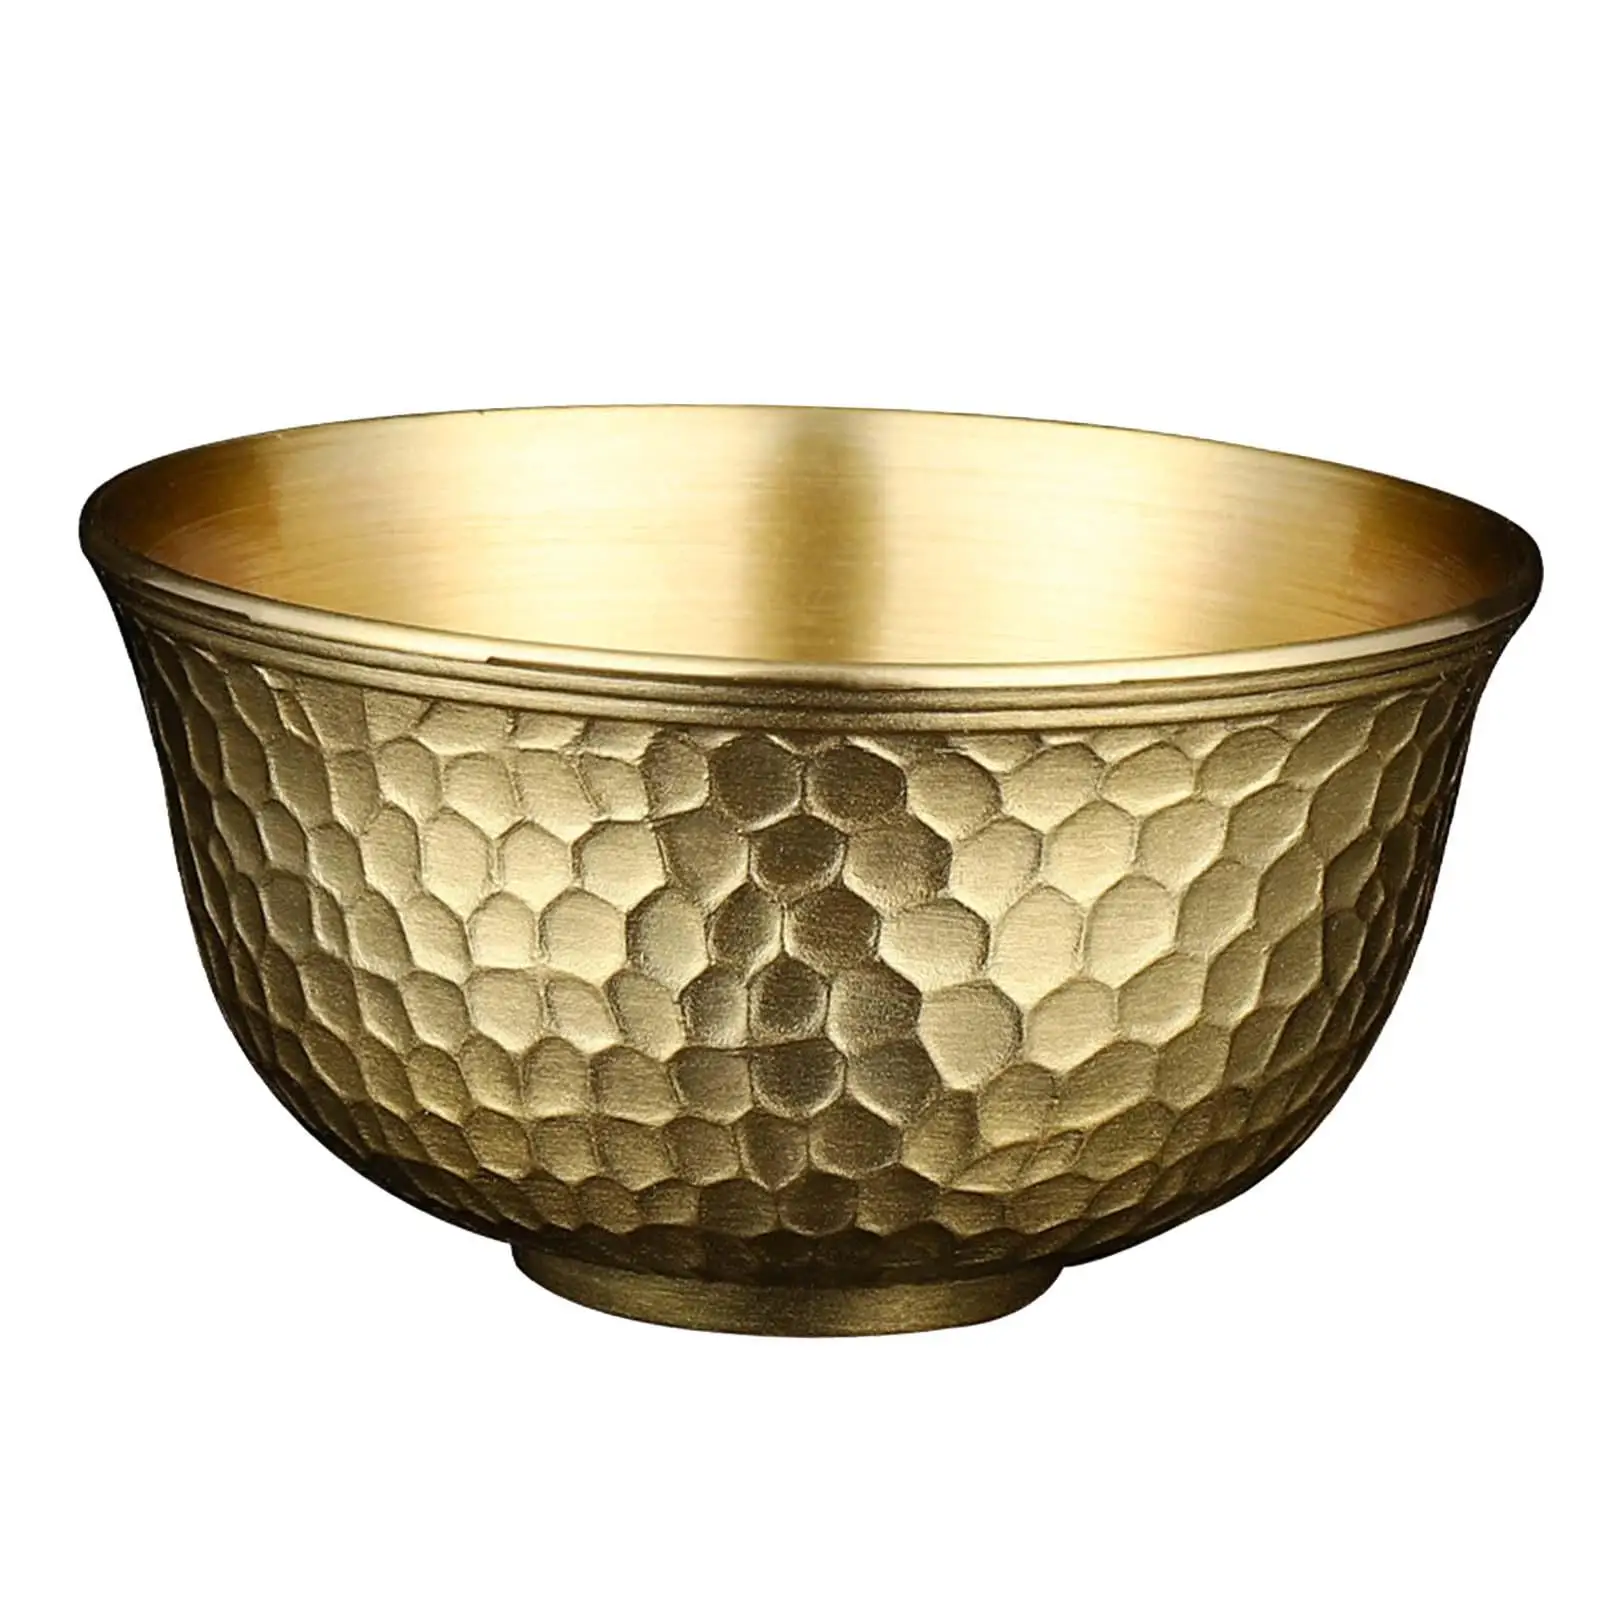 Treasure Bowl Novelty Classic Heavy Duty 2.48`` Diameter Copper Serving Bowl for Salads Mashed Potatoes Snacks Clam Fresh Fruit